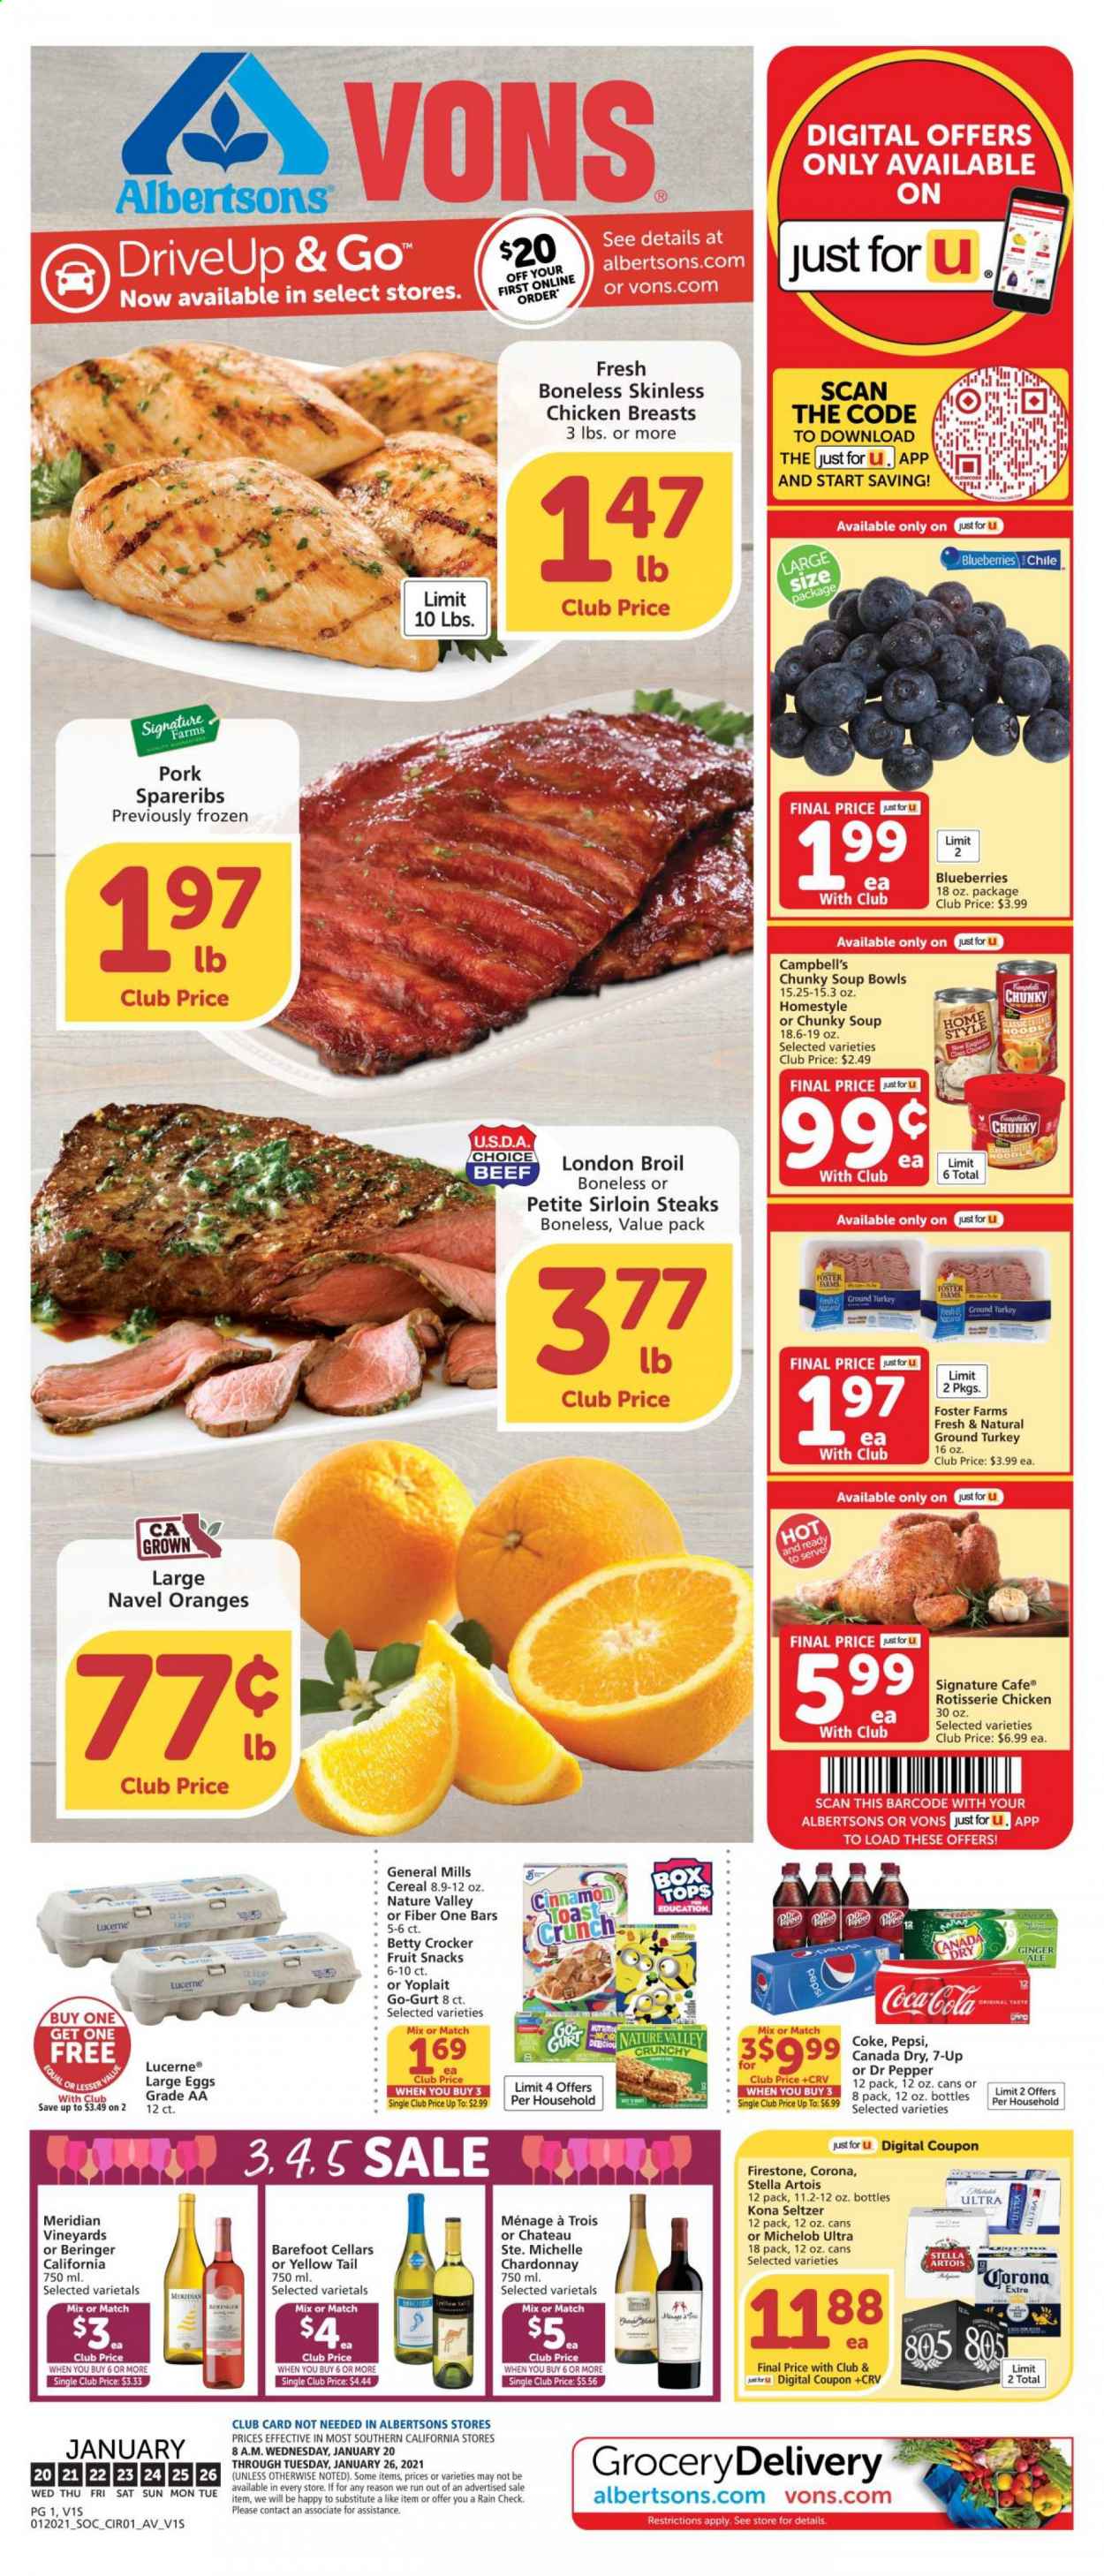 thumbnail - Albertsons Flyer - 01/20/2021 - 01/26/2021 - Sales products - Stella Artois, Michelob, blueberries, toast bread, oranges, Campbell's, soup, Yoplait, large eggs, fruit snack, cereals, Nature Valley, Fiber One, cinnamon, Canada Dry, Coca-Cola, ginger ale, Pepsi, Dr. Pepper, 7UP, seltzer water, Chardonnay, wine, beer, Corona Extra, ground turkey, chicken breasts, steak, sirloin steak, pork spare ribs. Page 1.